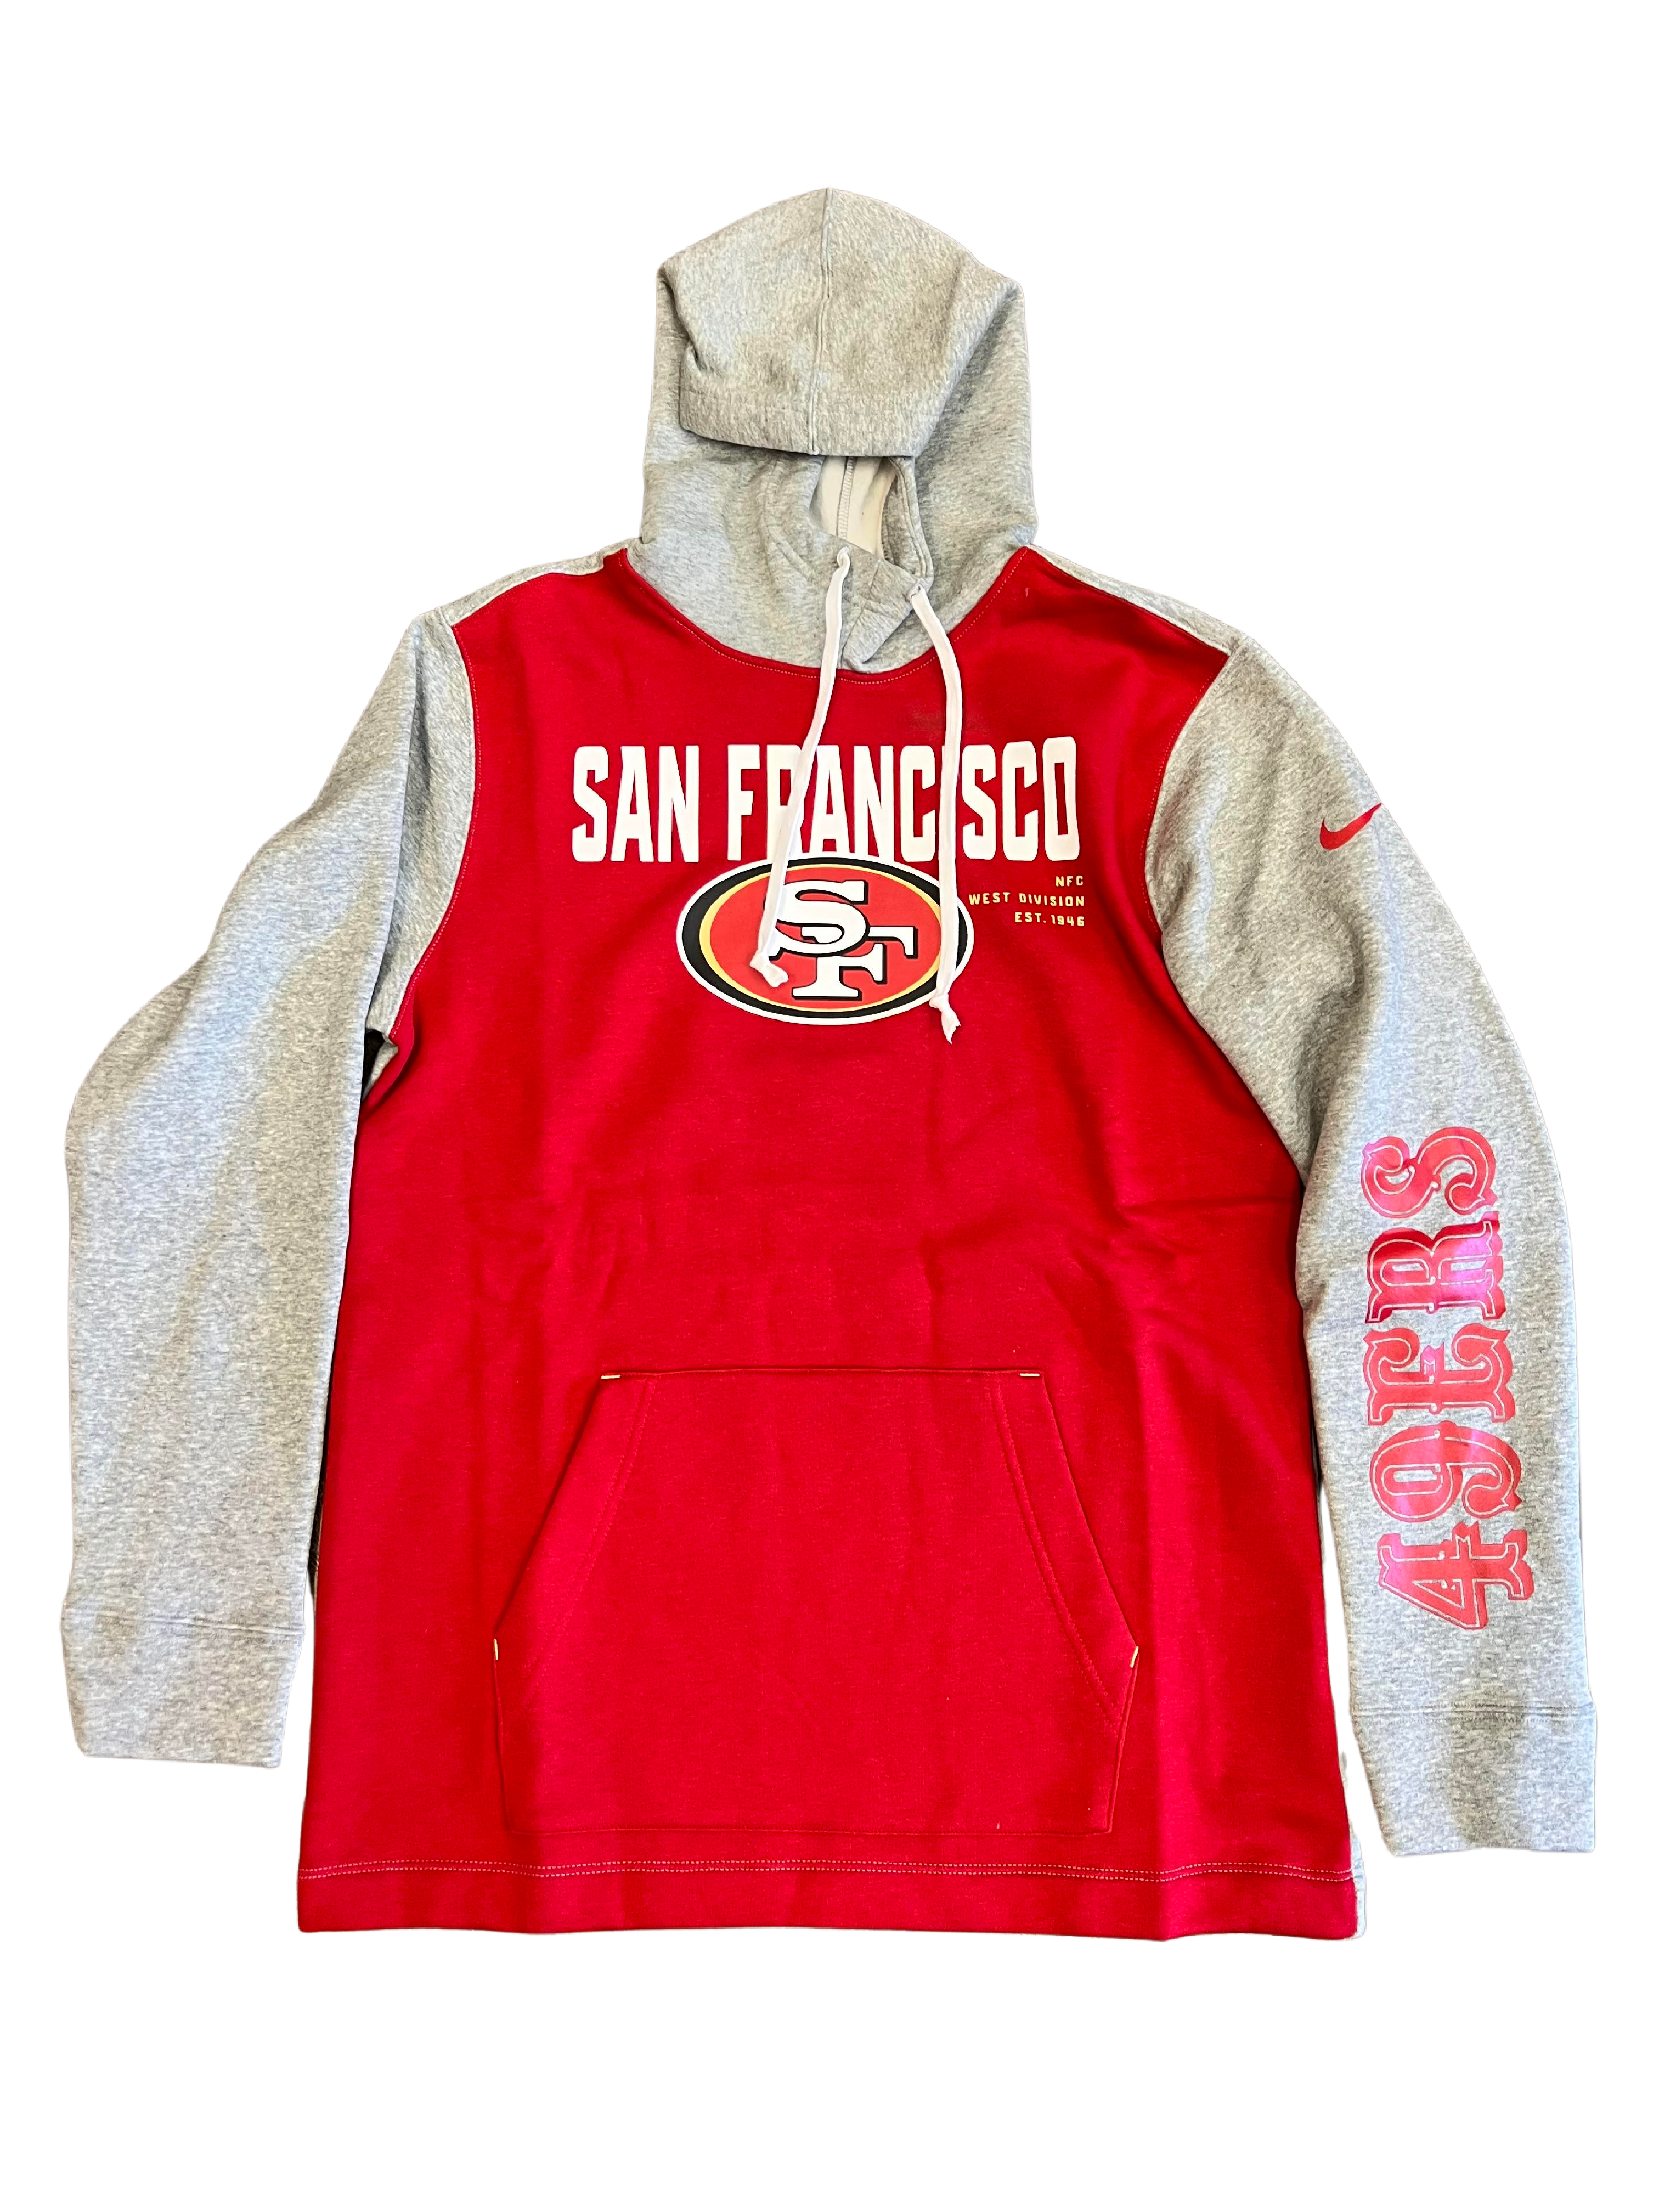 Nike San Francisco 49ers NFC West Division Hoodie-Red/grey